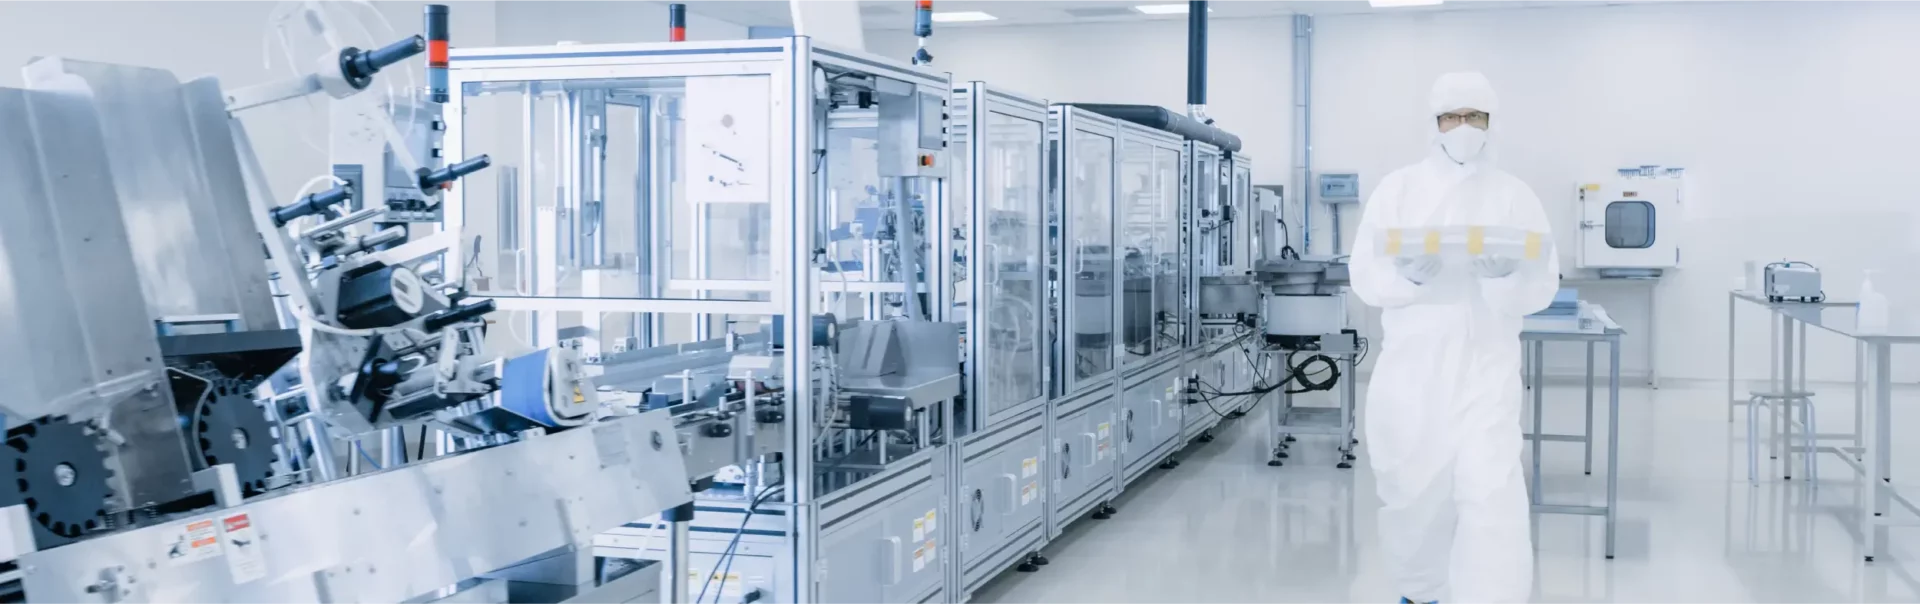 Reliable, Fast, and High Capacity Pharmaceutical Delivery